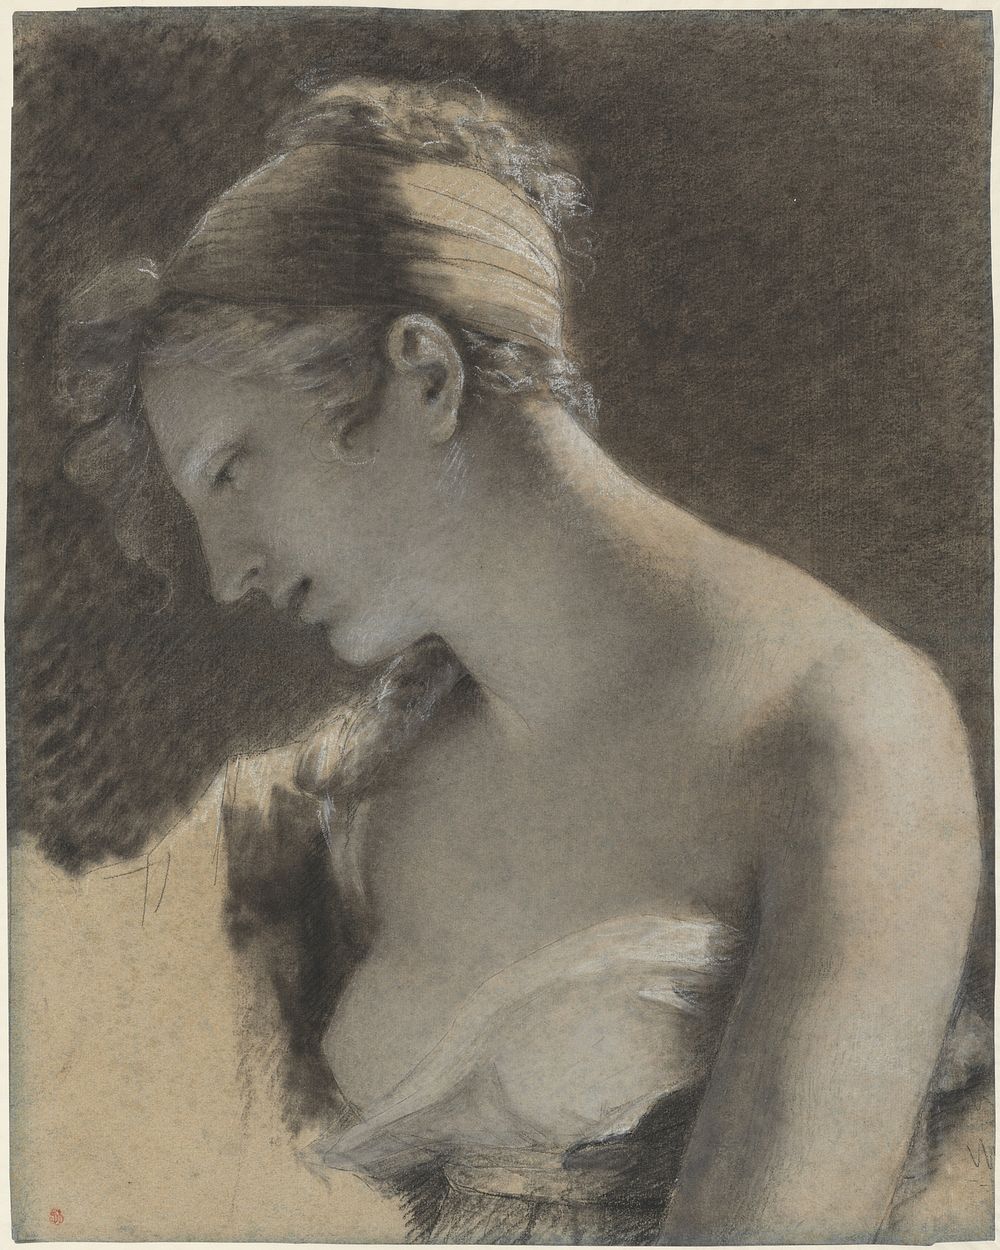 Head of a Woman: Study for "The Happy Mother" (L'Heureuse mère) by Pierre Paul Prud hon